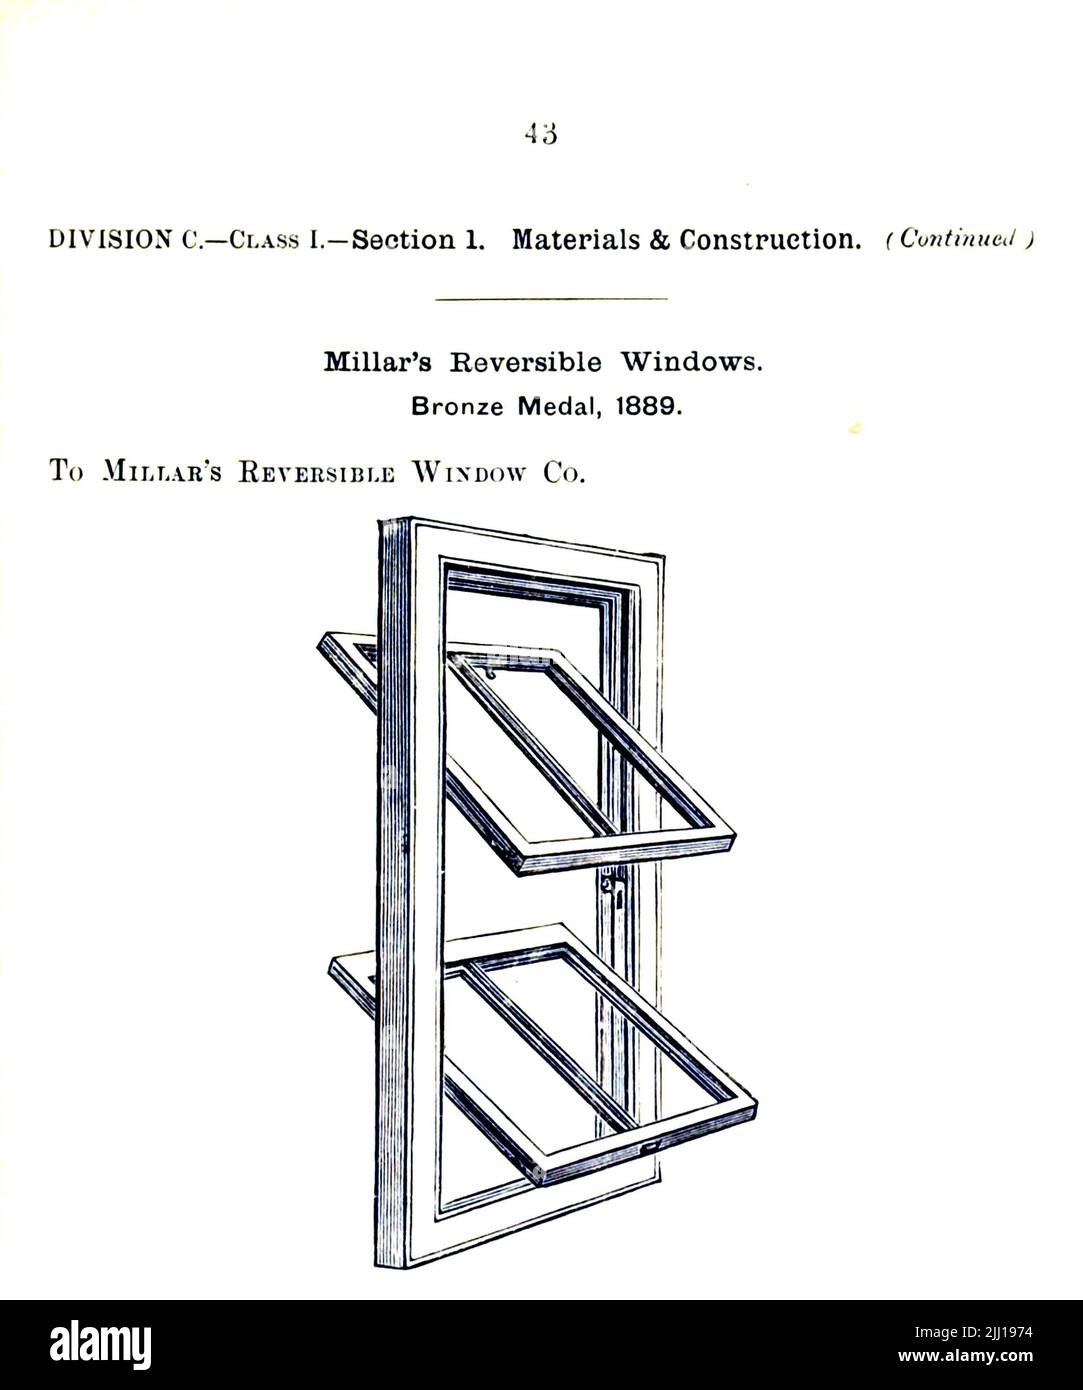 Millar’s Reversible Windows CONSTBUCTION AND SANITARY APPARATUS. Class 1 - Materials and Construction from the book ' Illustrated list of exhibits to which medals have been awarded at their exhibitions, held in connection with the congresses at Worcester, 1889 ; Brighton, 1890 ; Portsmouth, 1892 ; Liverpool, 1894 ; Newcastle, 1896 ; Leeds, 1897 ; Birmingham, 1898 ; Southampton, 1899 by Sanitary Institute (Great Britain) Publication date 1906 Publisher London : Offices of the Sanitary Institute Stock Photo